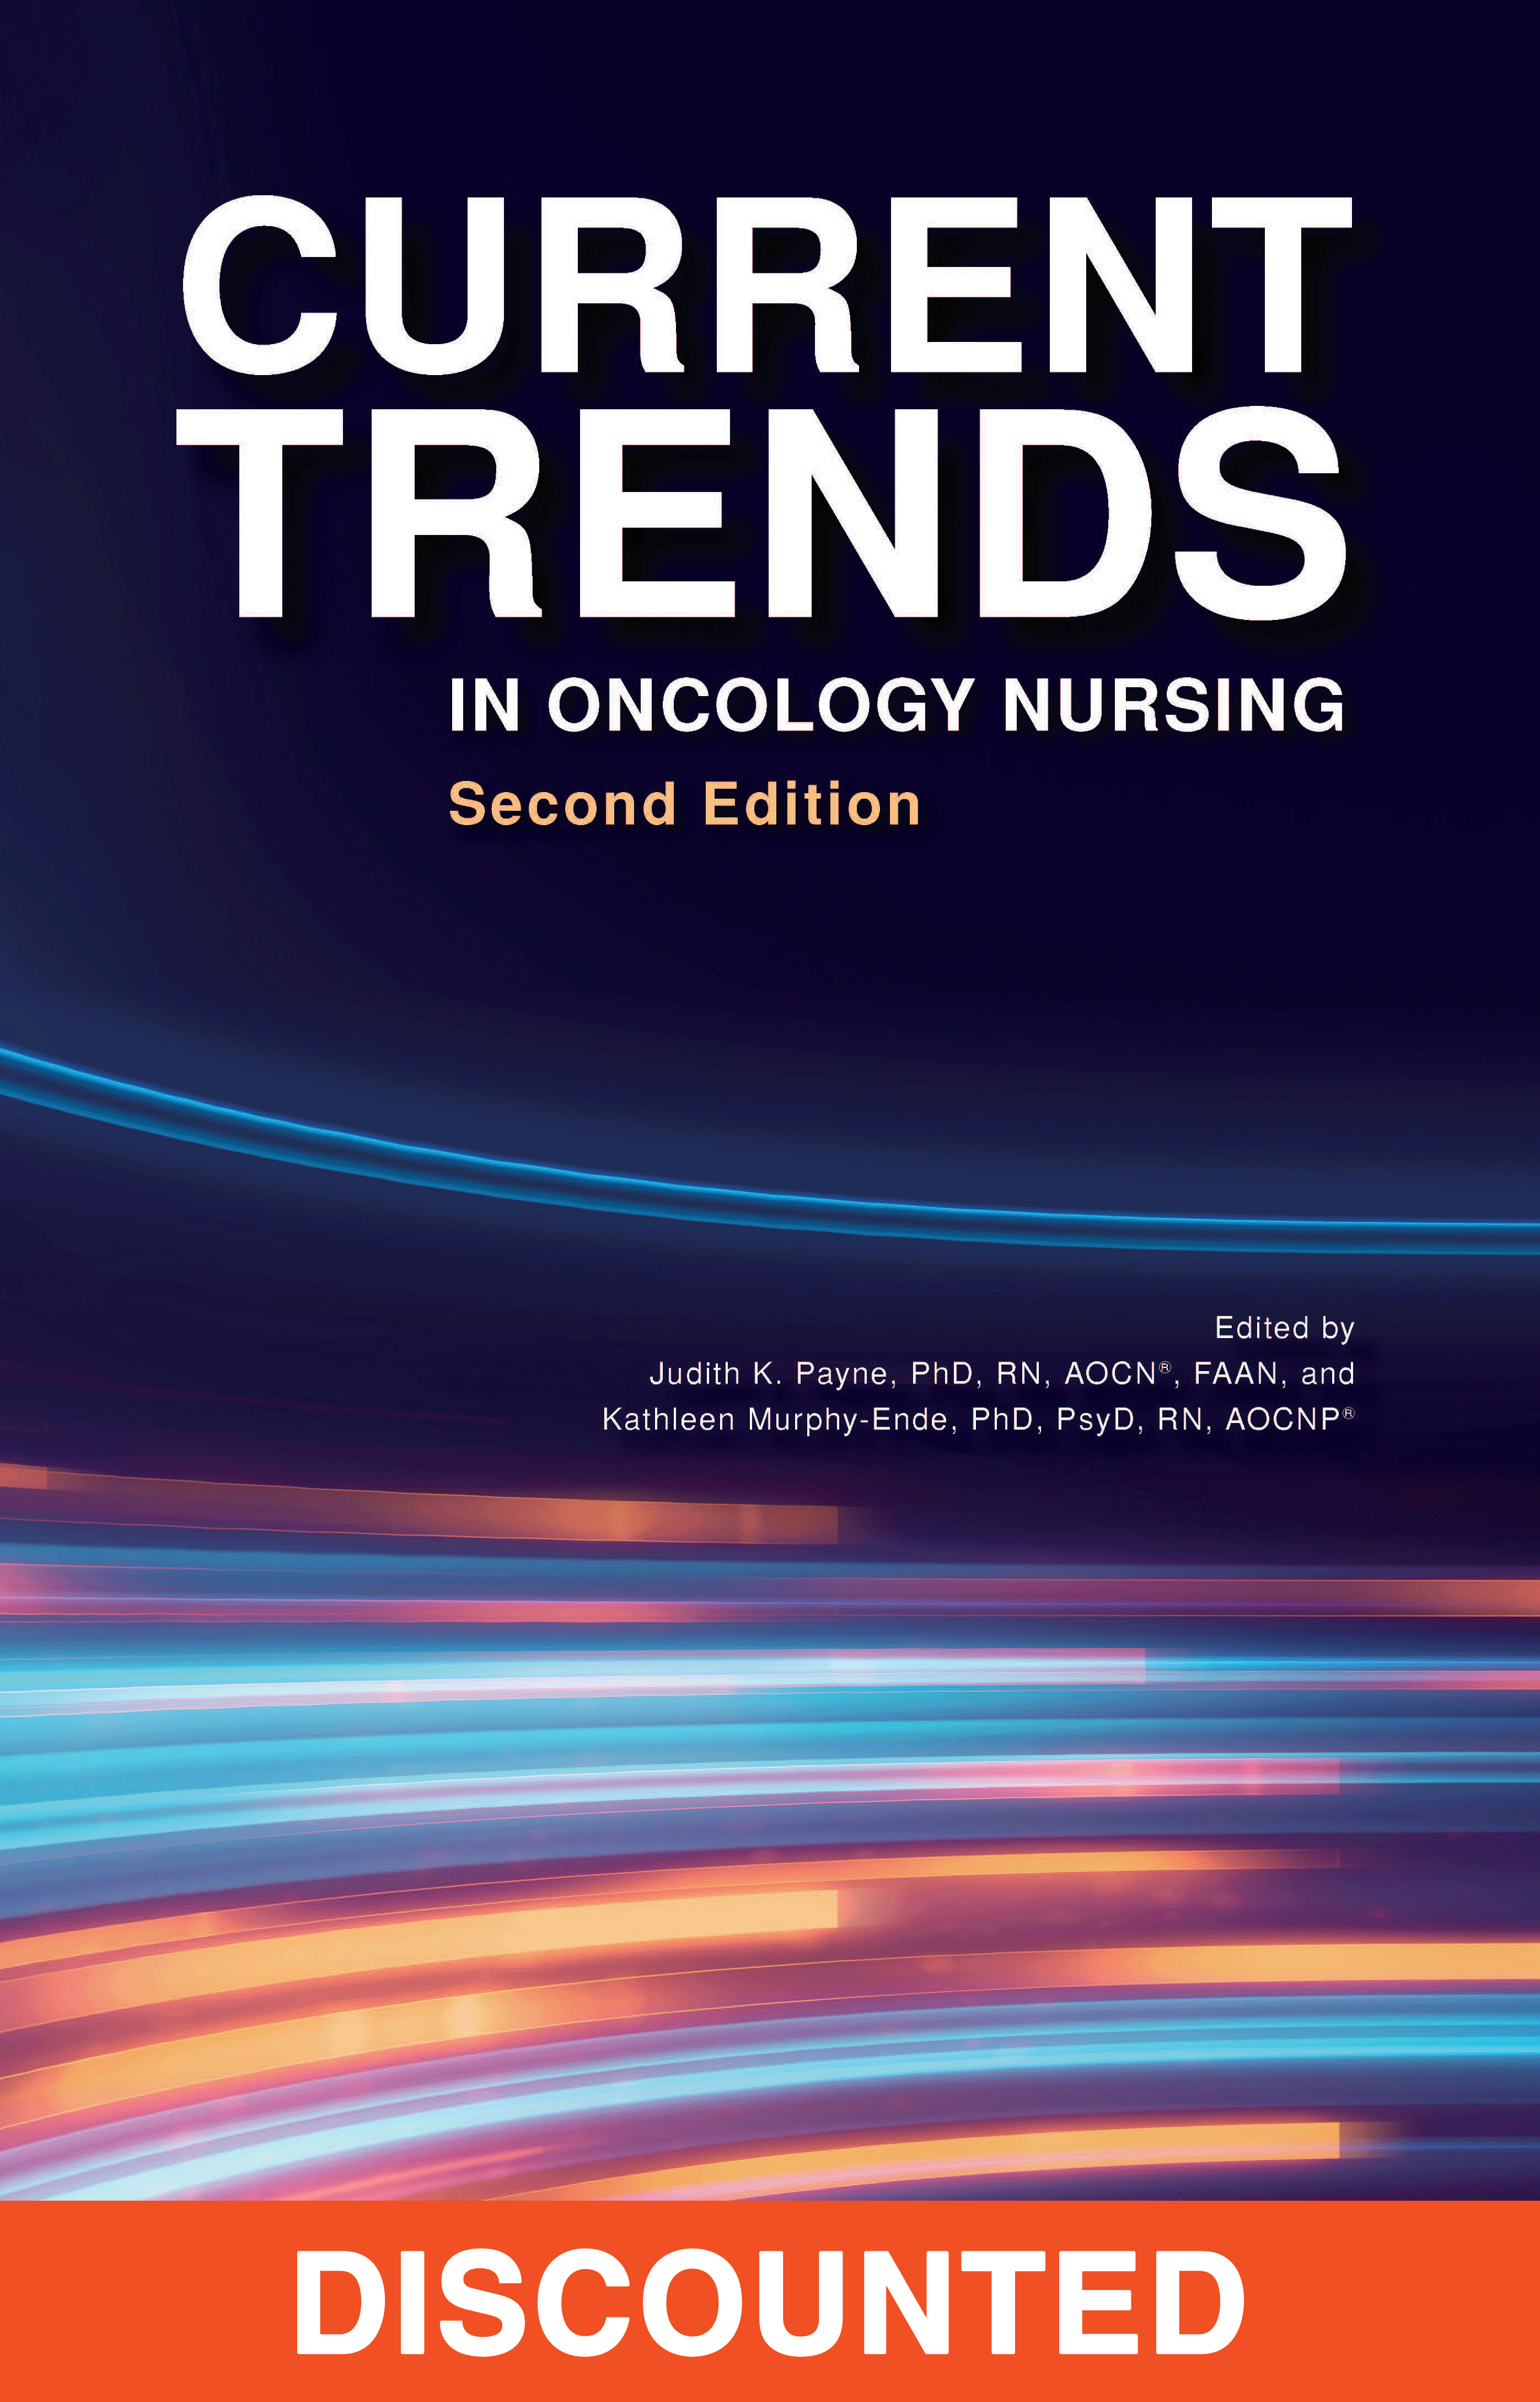 Current Trends In Oncology Nursing (Second Edition)